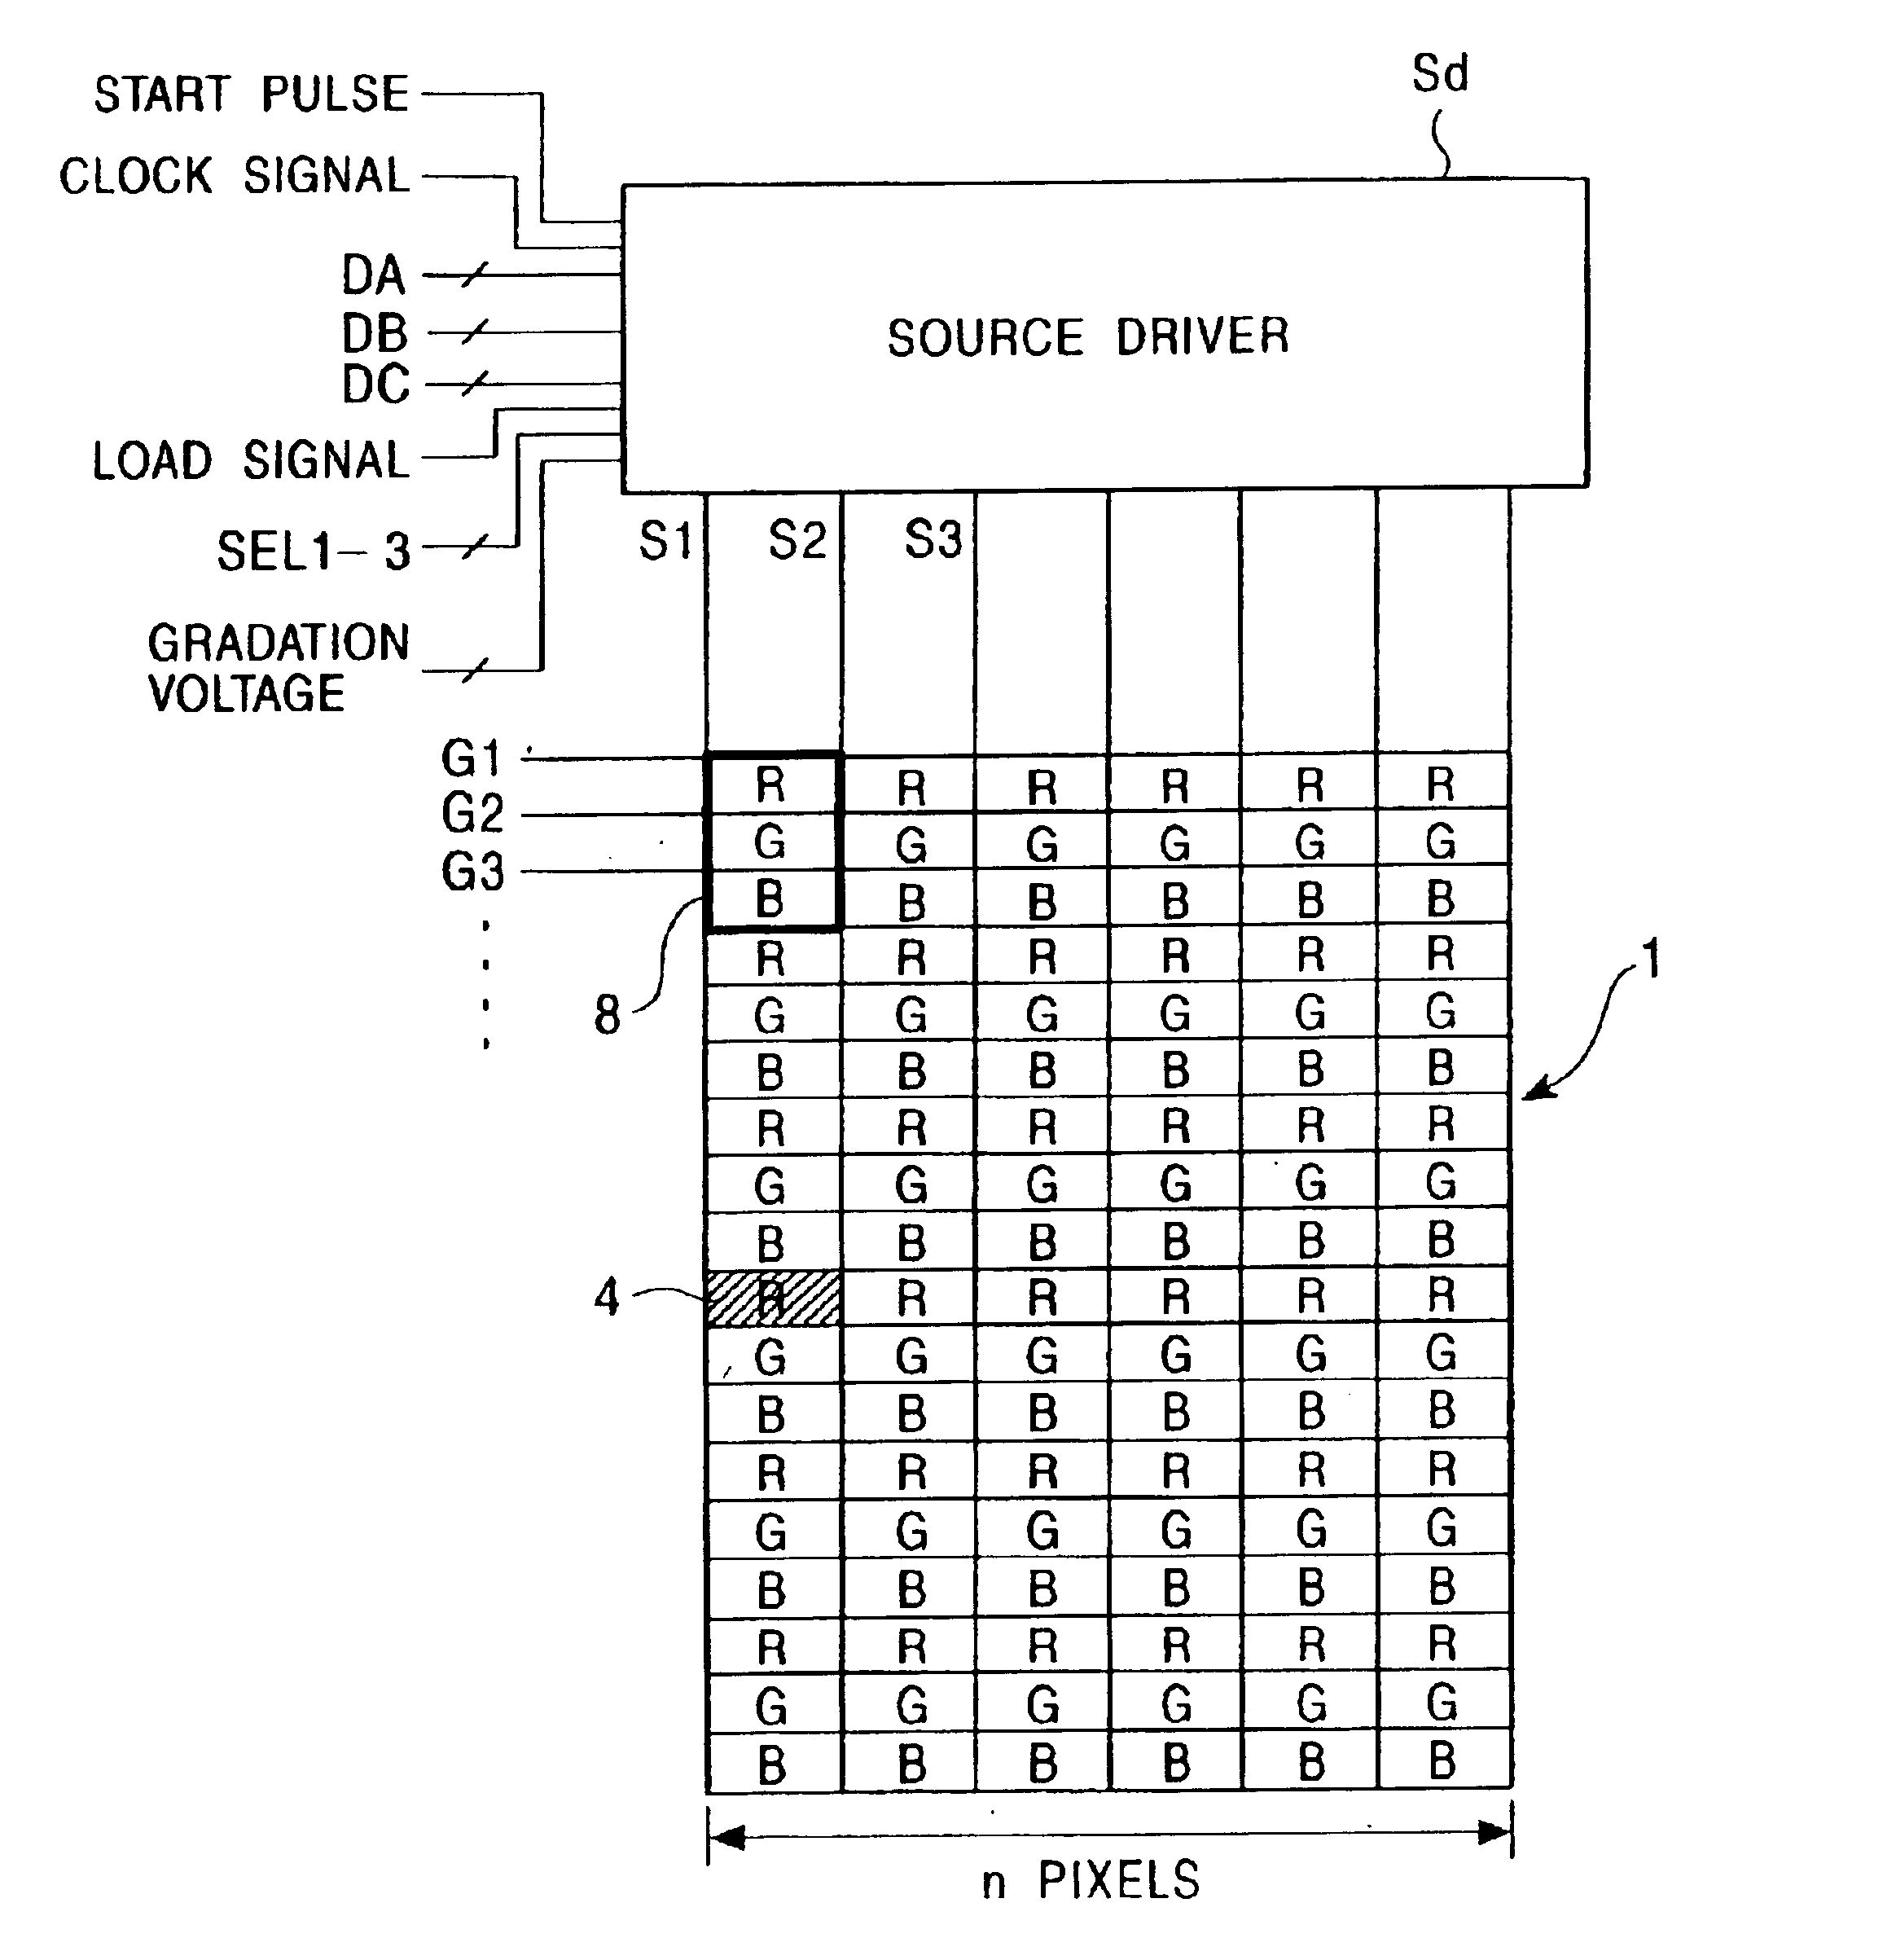 Image-signal driving circuit eliminating the need to change order of inputting image data to source driver